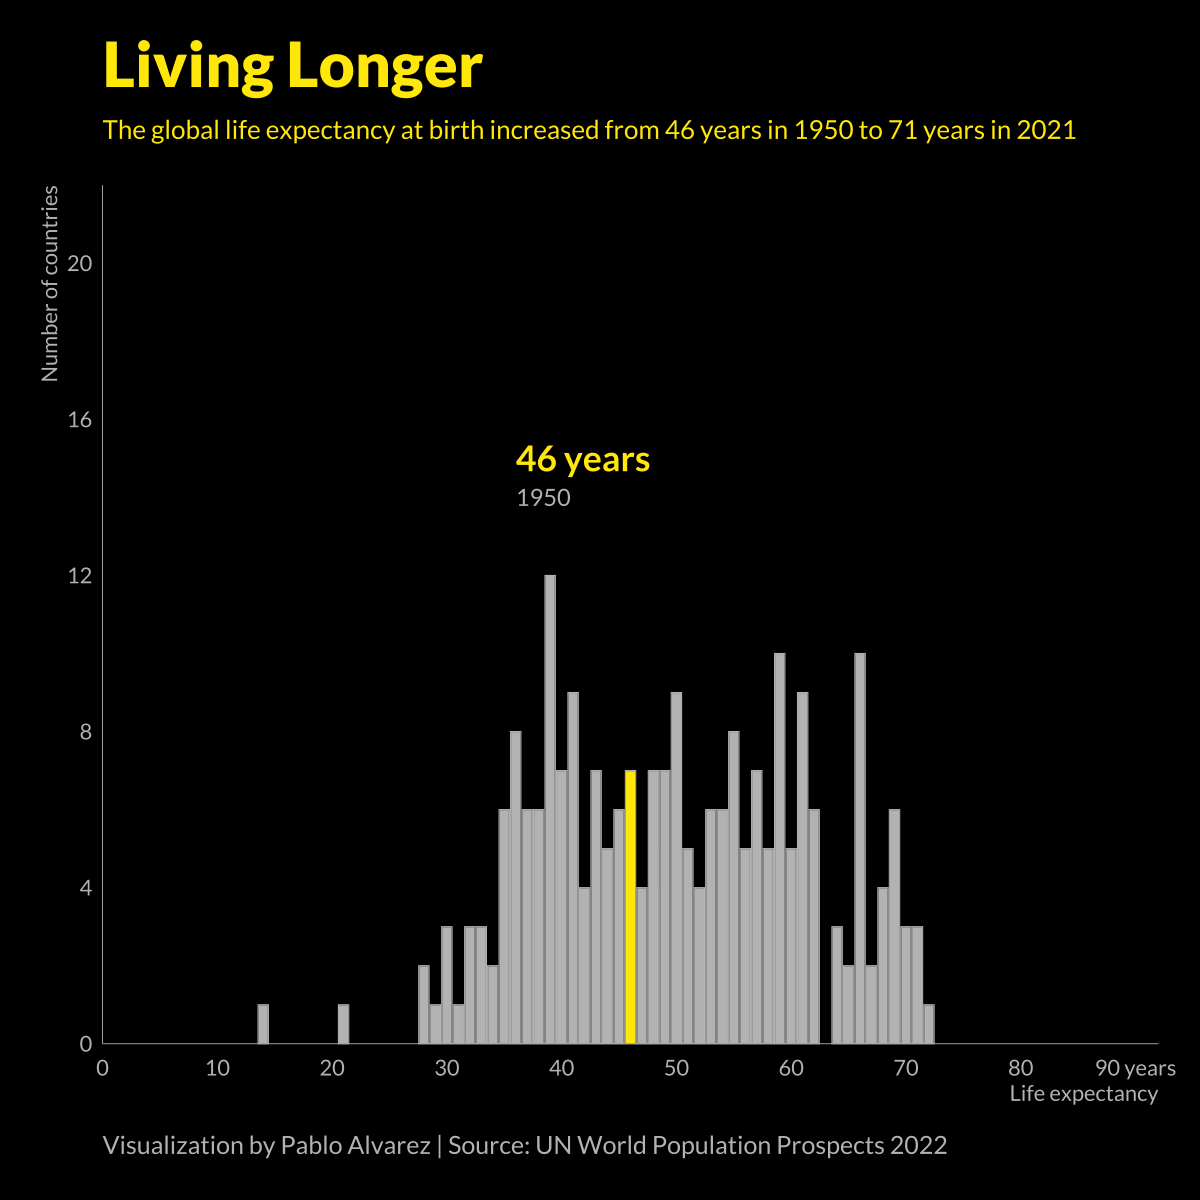 Comparing global life expectancy over time